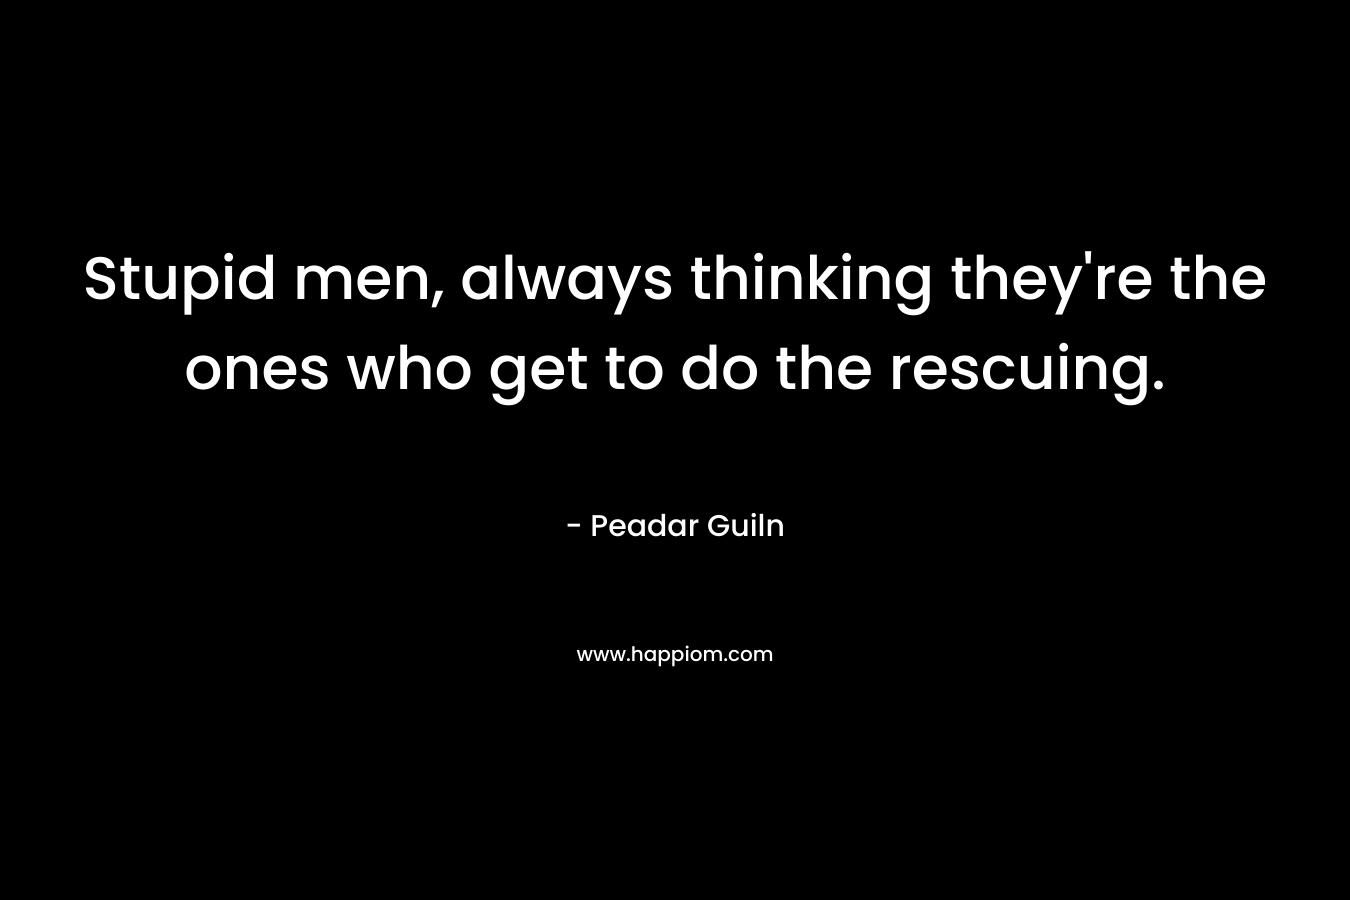 Stupid men, always thinking they're the ones who get to do the rescuing.